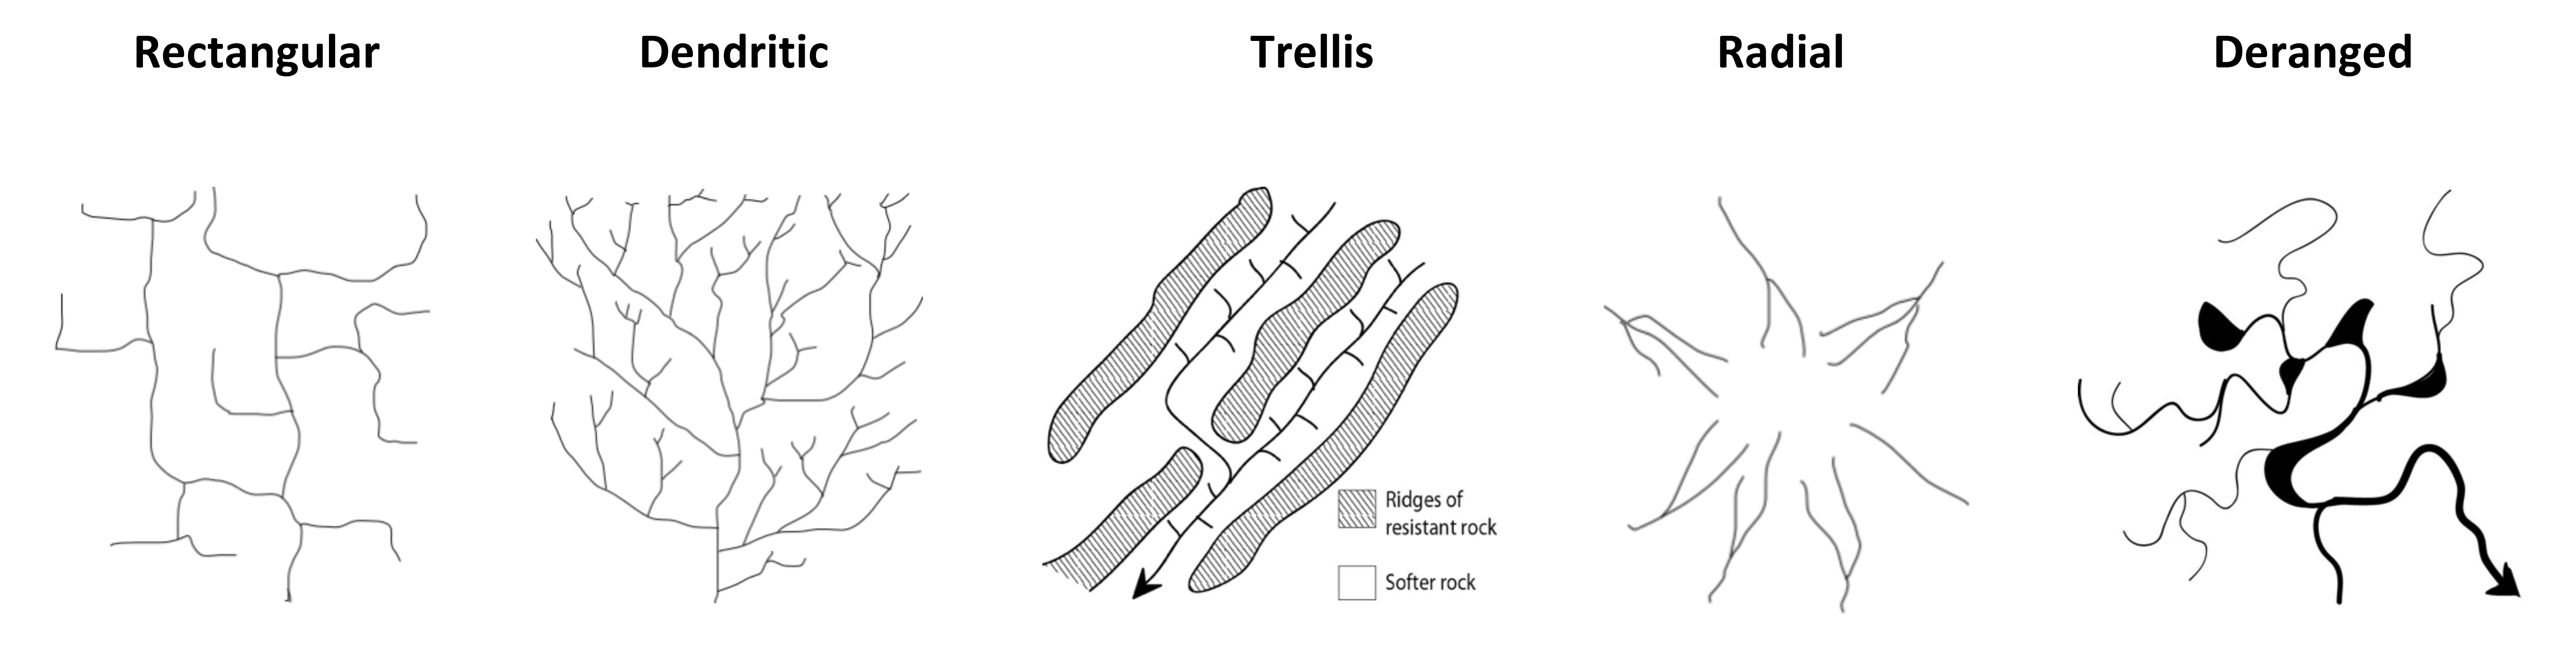 Five schematic diagrams of stream drainage patterns: rectangular drainage shows streams curving at nearly right angles; dendritic drainage shows streams resembling tree branches; trellis drainage shows parallel ridge lines with streams between ridge lines; radial drainage shows streams radiating outward from a central high point; and deranged drainage shows curvy, erratic streams that appear and disappear.